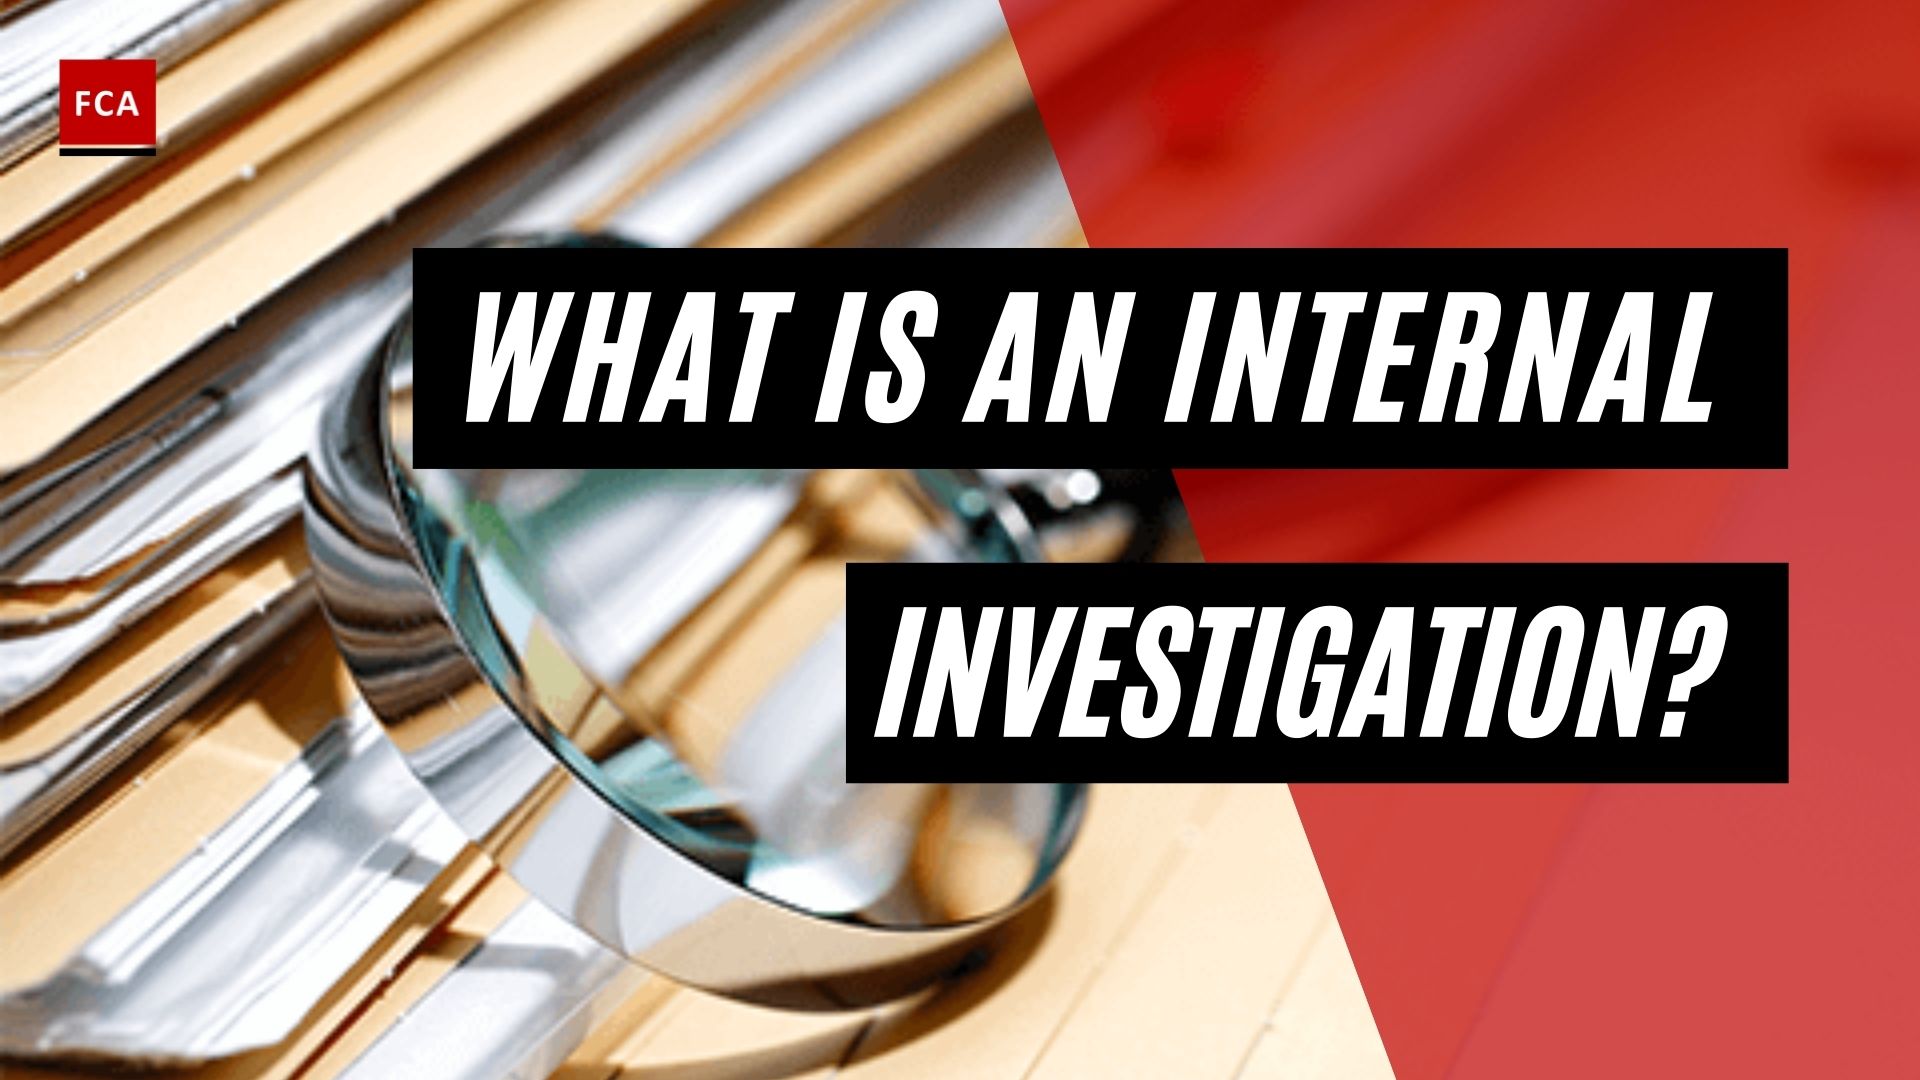 What Is An Internal Investigation?